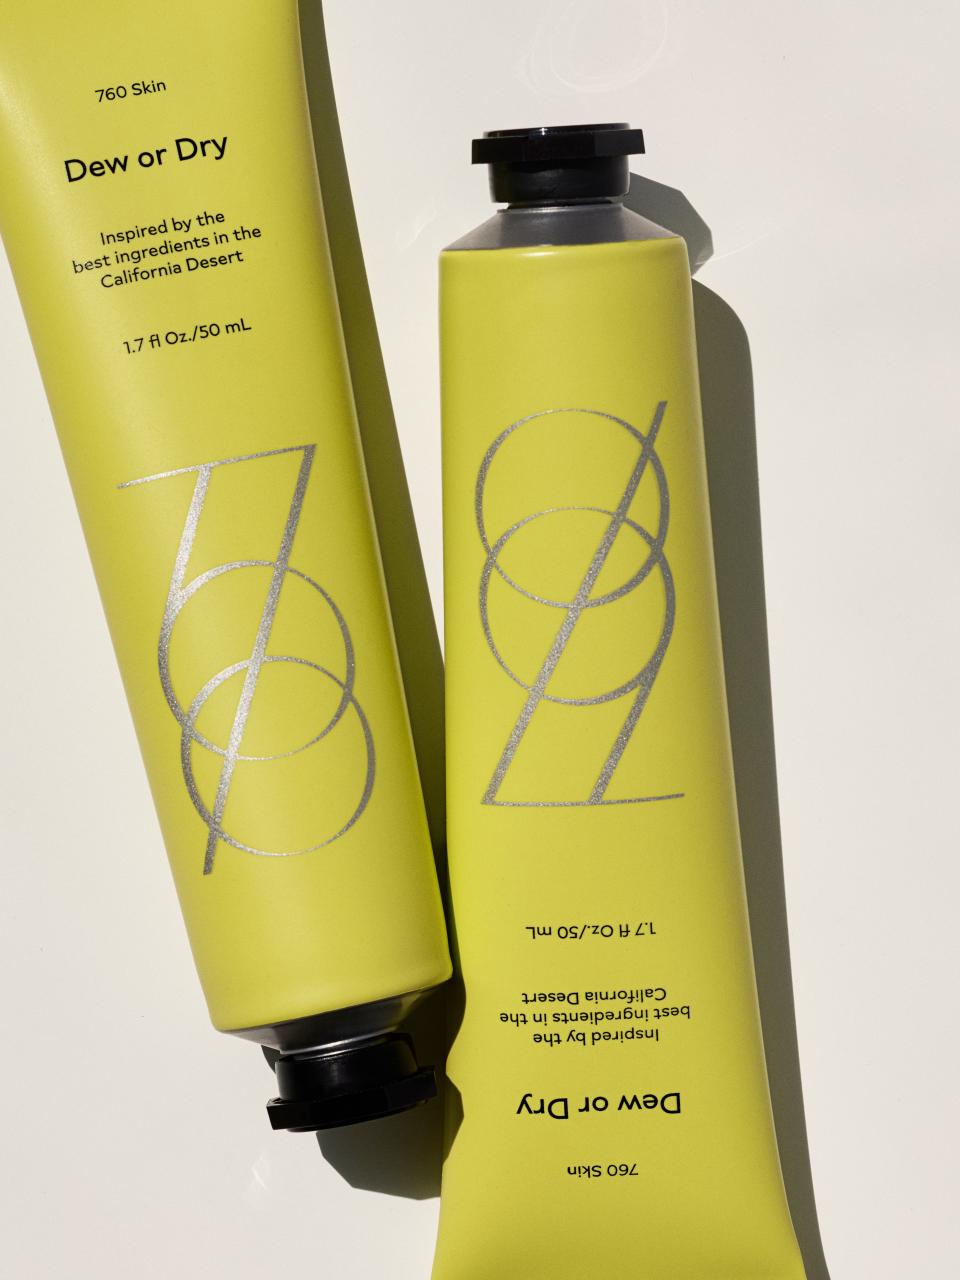 Founded by three Palm Springs locals, 760 Skin's Dew or Dry Moisturizer is "free of parabens, sulfates, and phthalates that harnesses the power of desert plants to give skin a healthy, glowing appearance," according to its website.